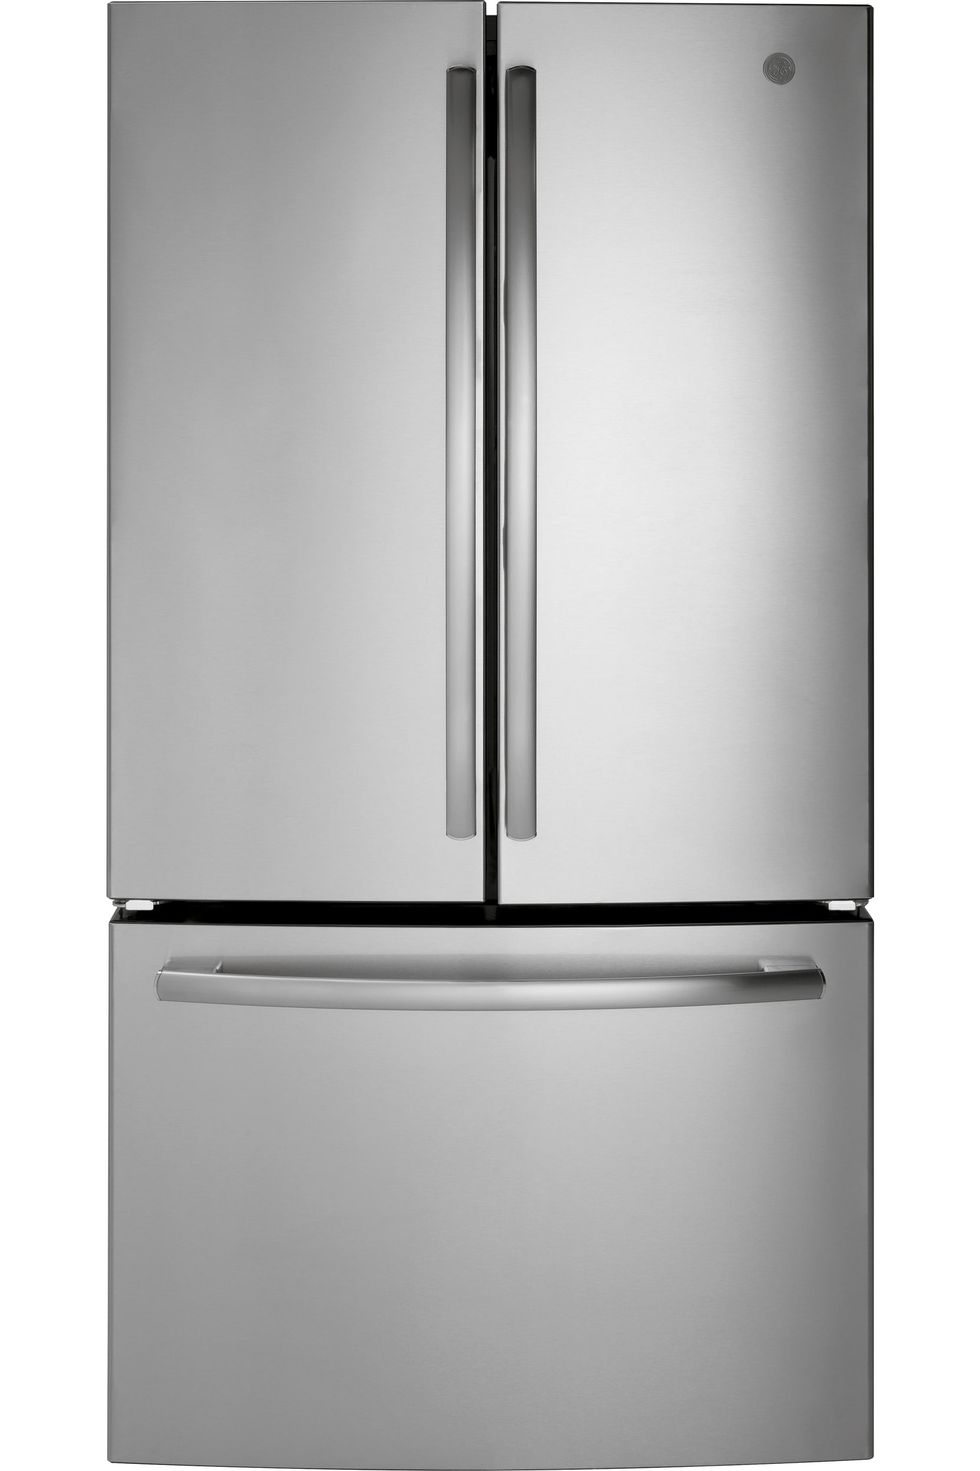 6 Best Mini Fridge without Freezer 2022 - Review and Buying Guide